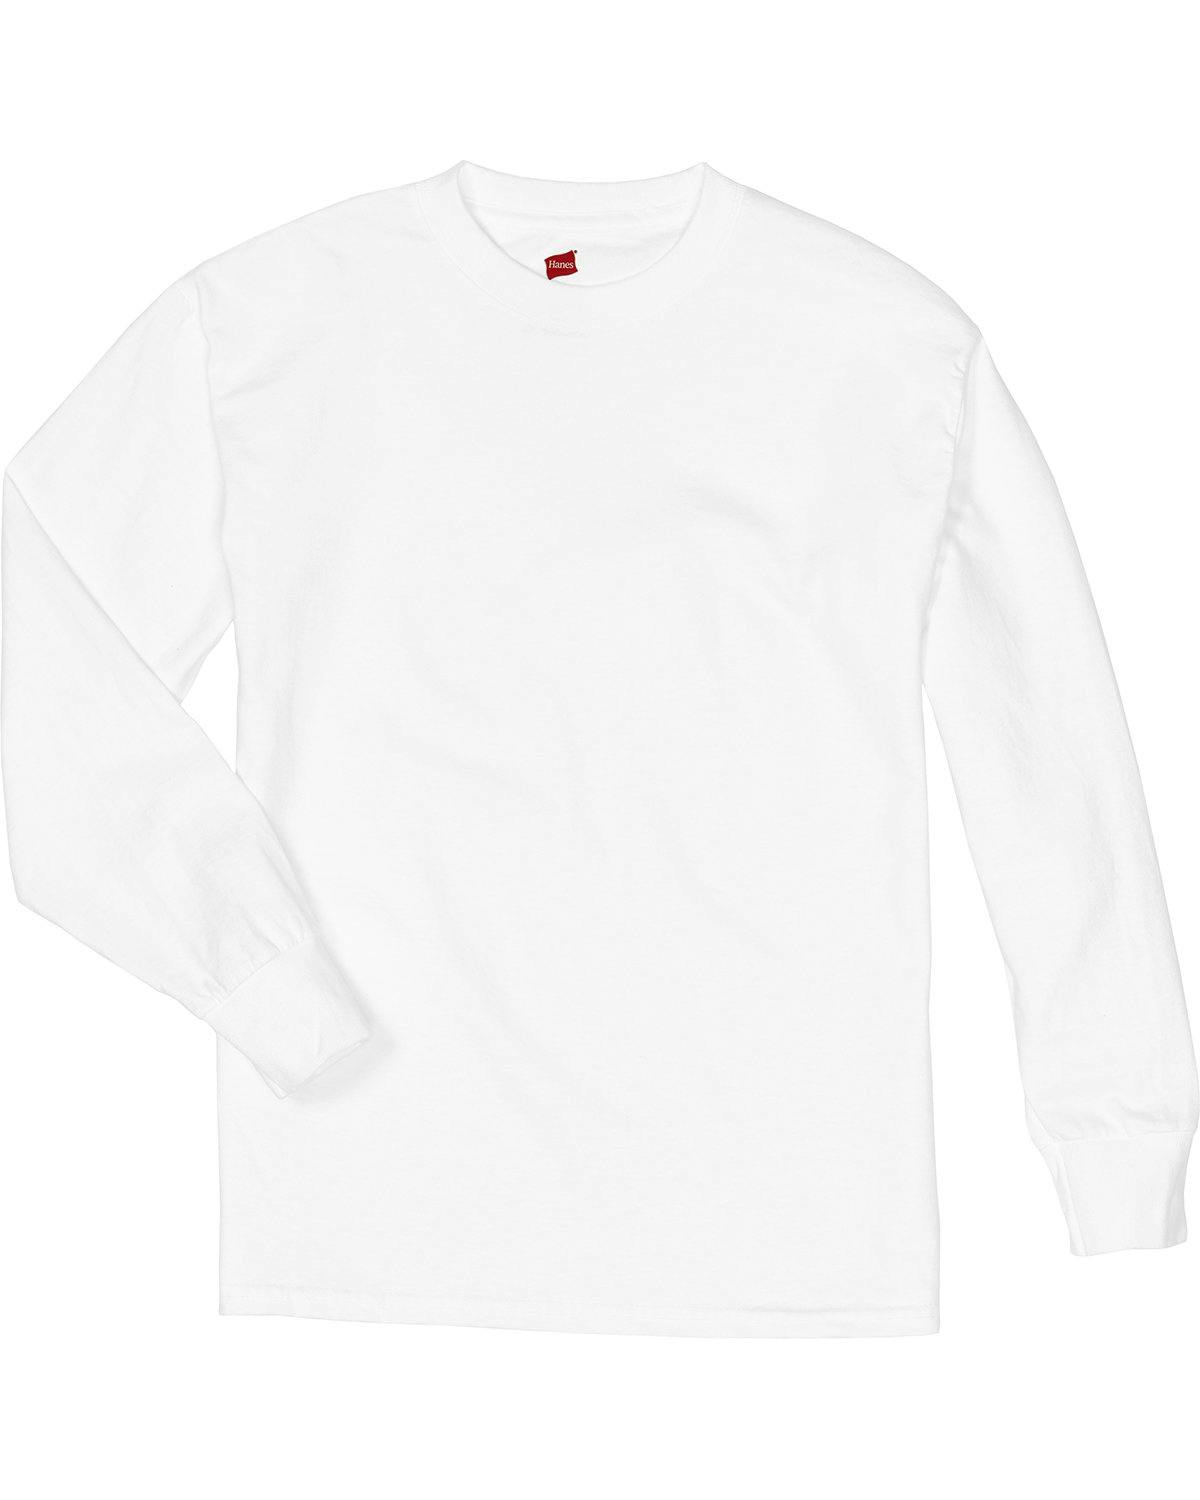 Image for Youth Authentic-T Long-Sleeve T-Shirt